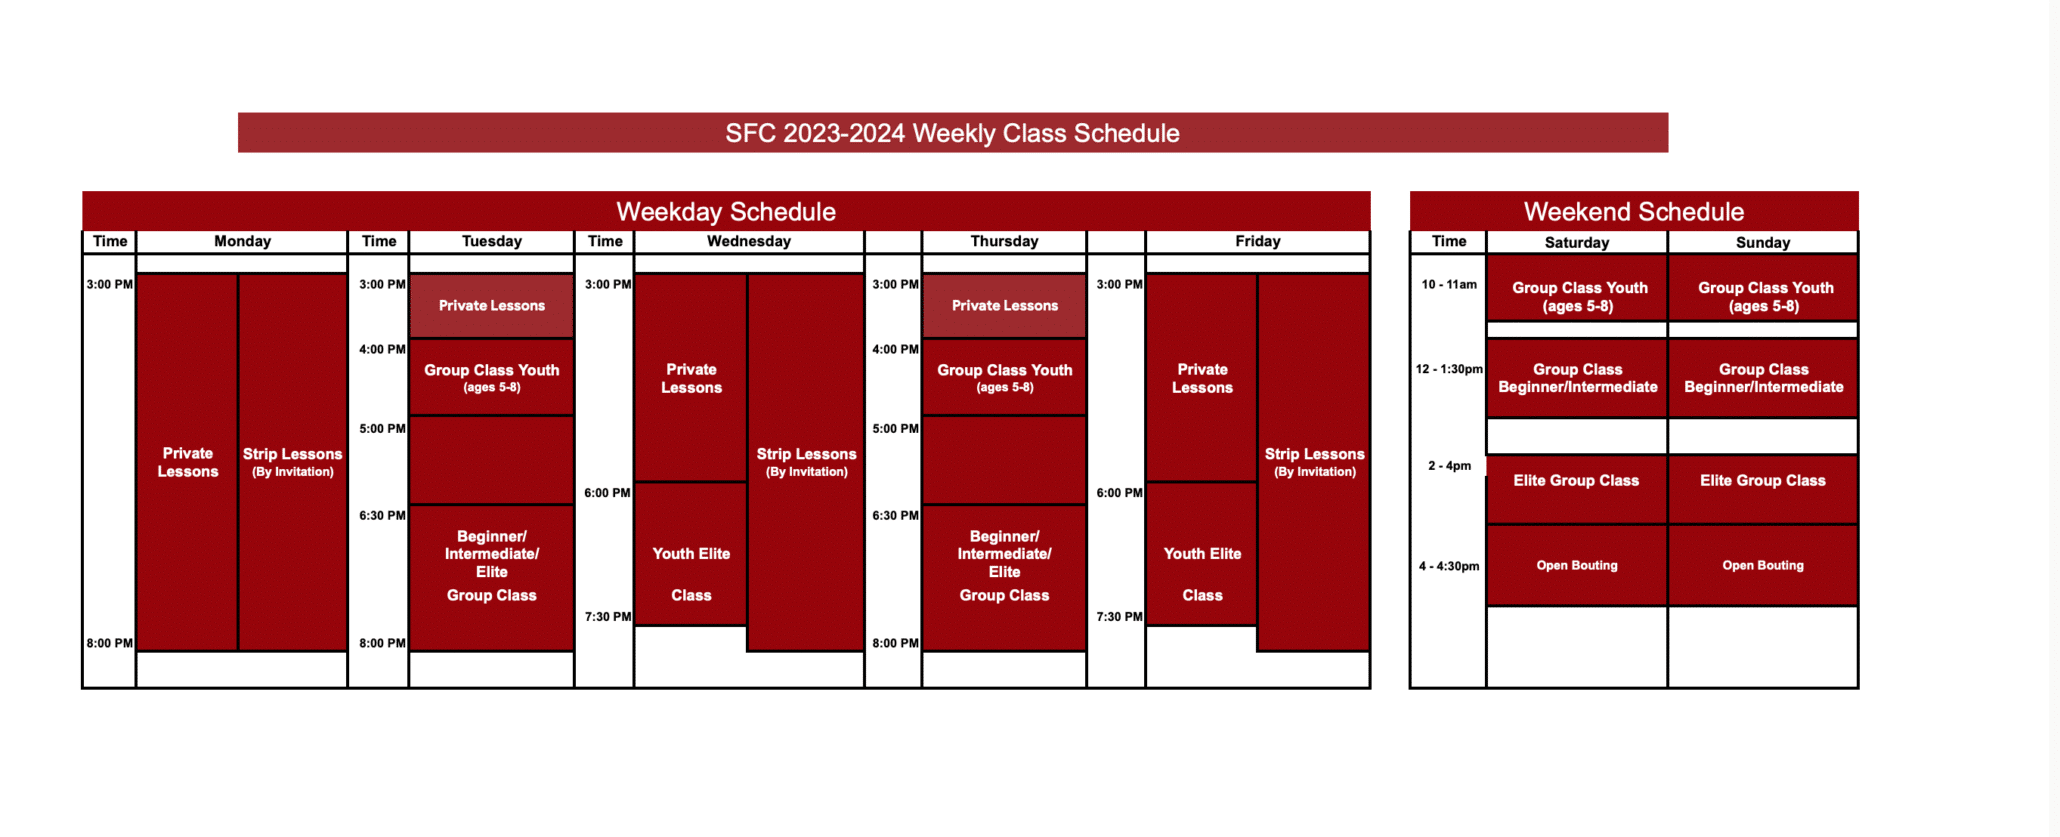 SFC 2023-2024 Weekly class schedule